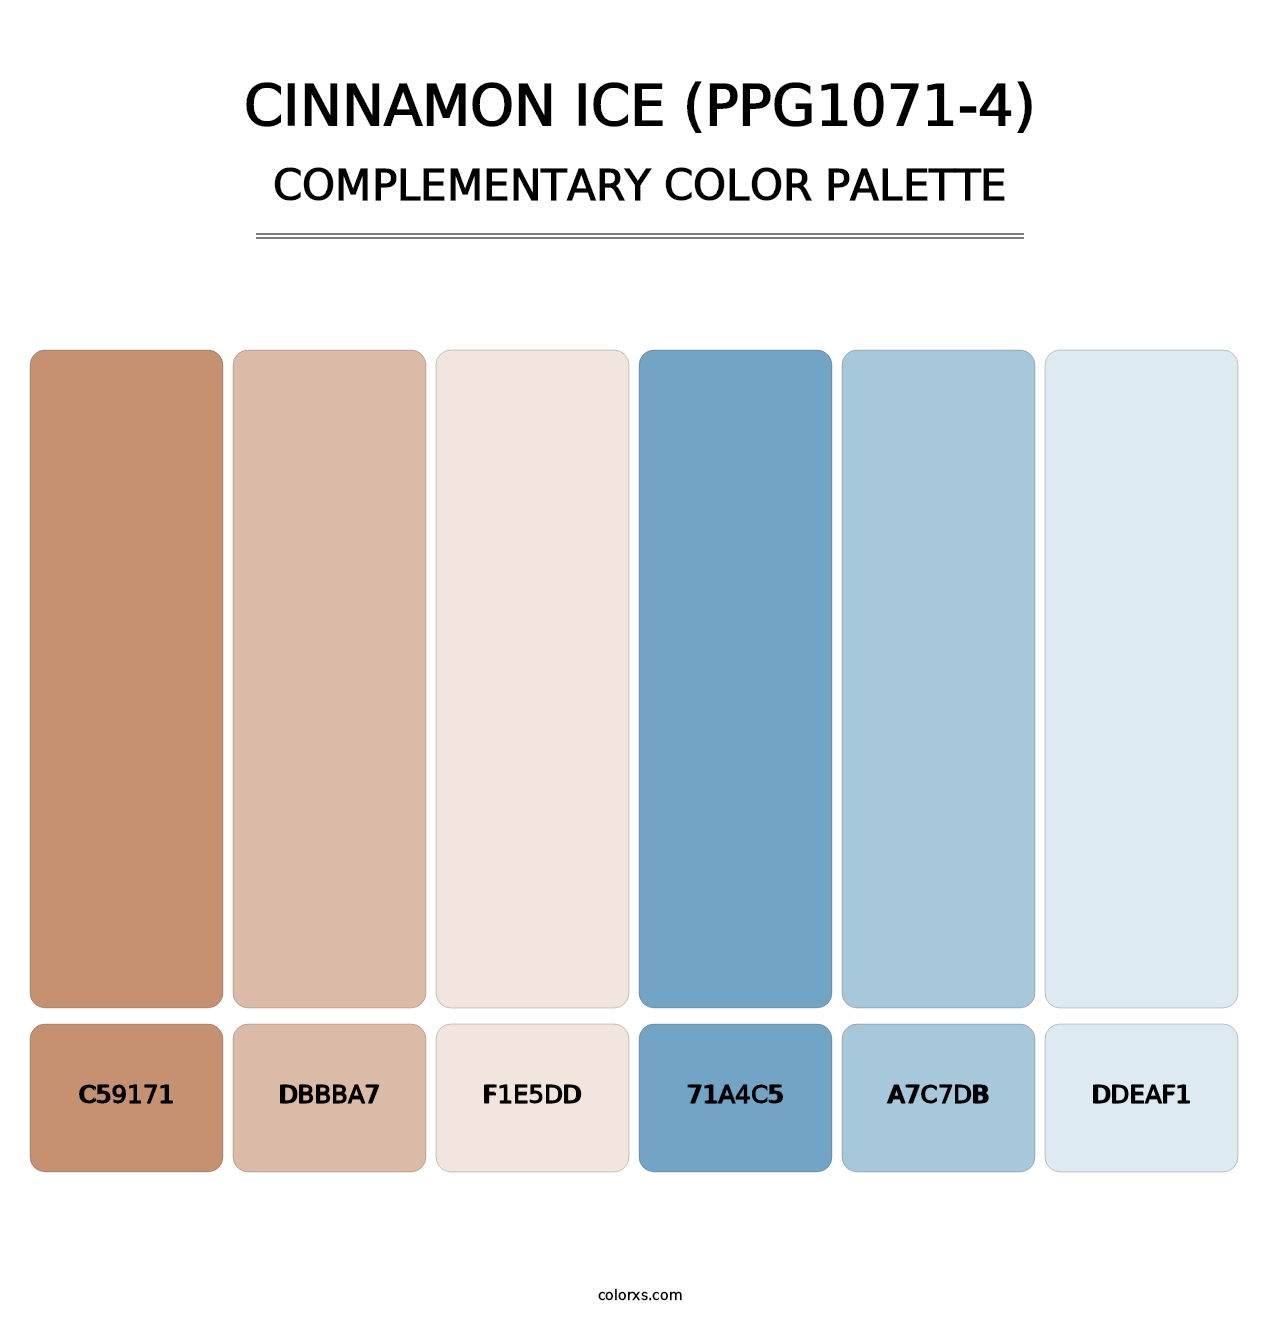 Cinnamon Ice (PPG1071-4) - Complementary Color Palette